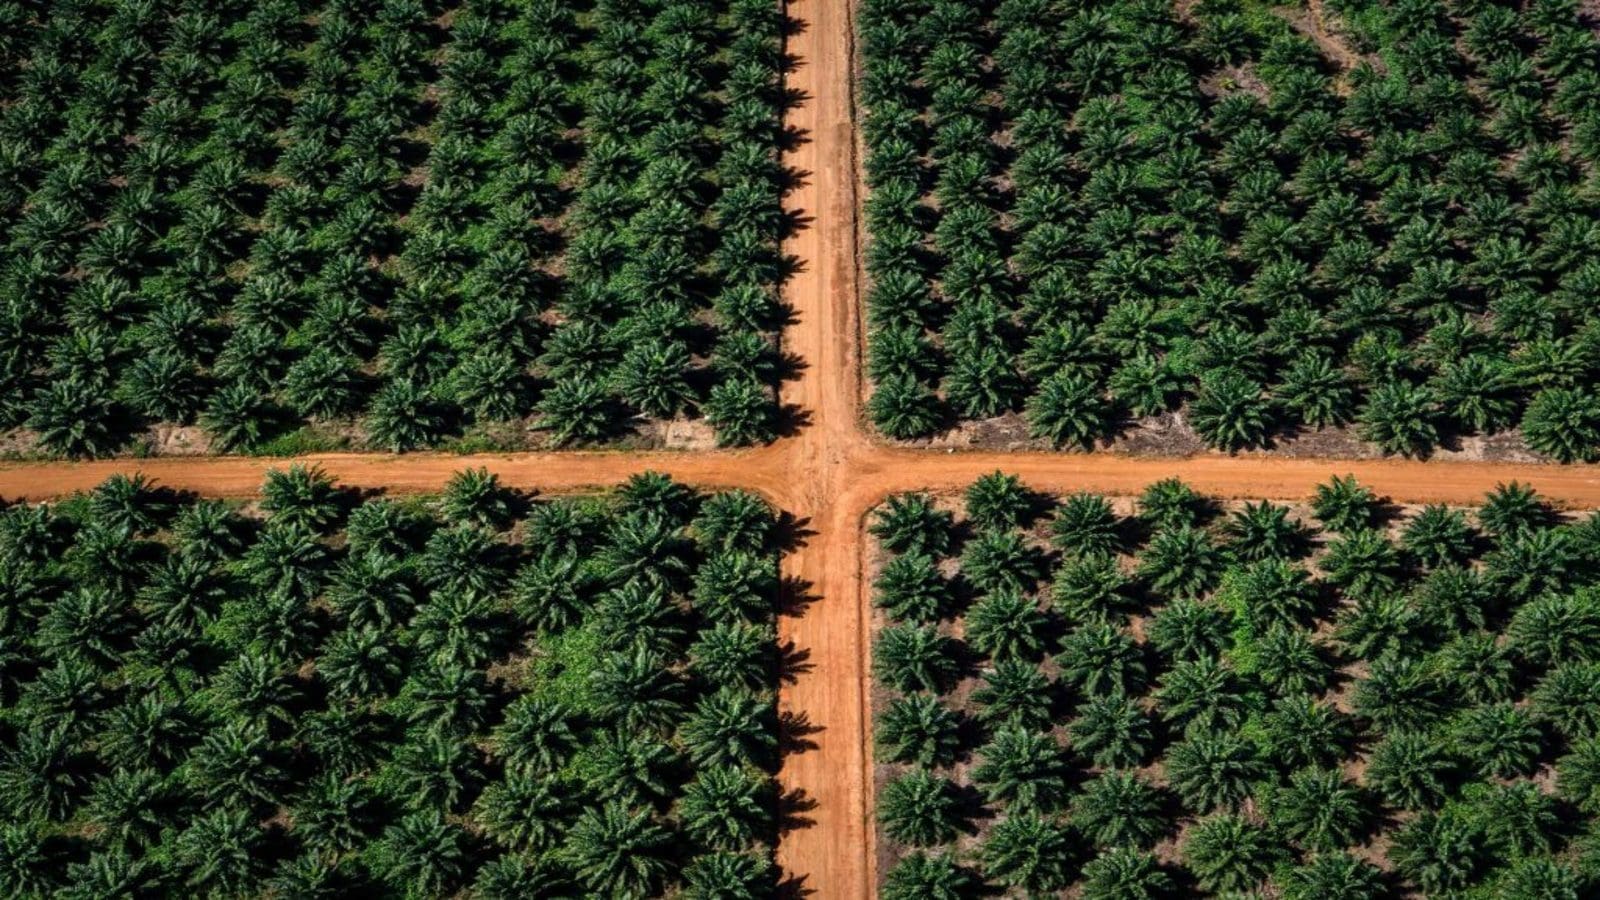 Indonesian government restricts palm oil exports to secure local supplies amid crisis